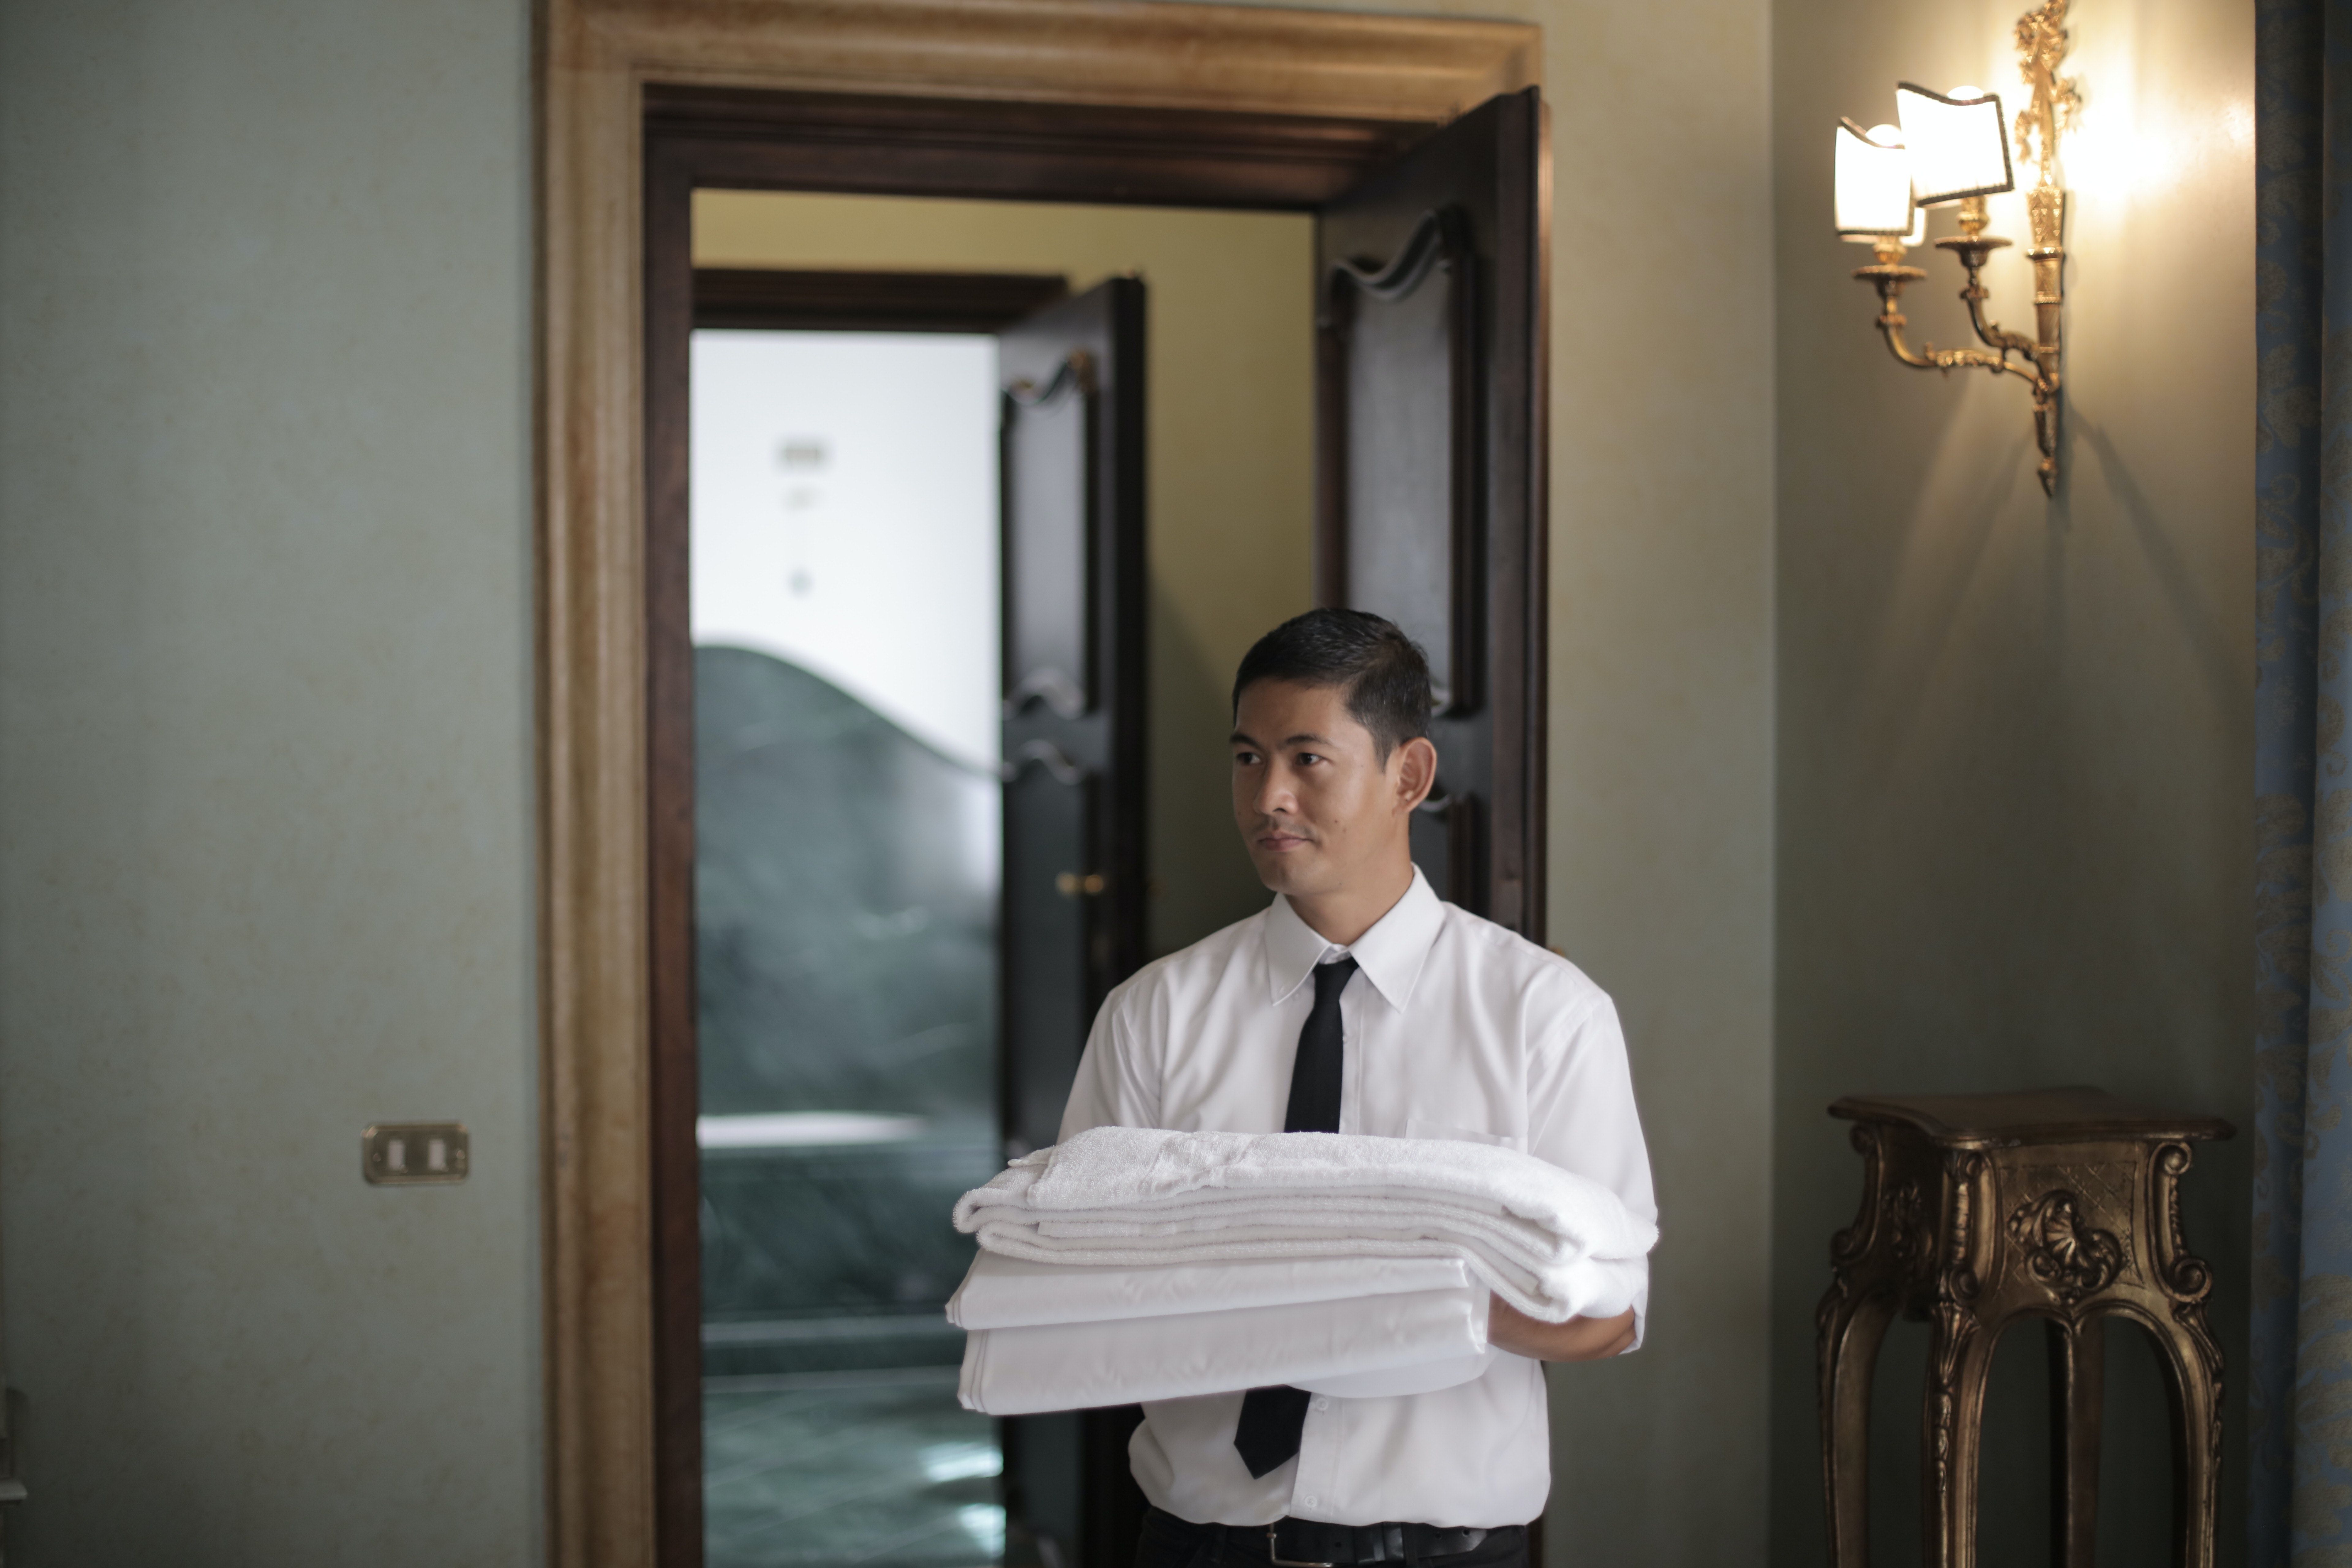 Hotel staff with bed linen